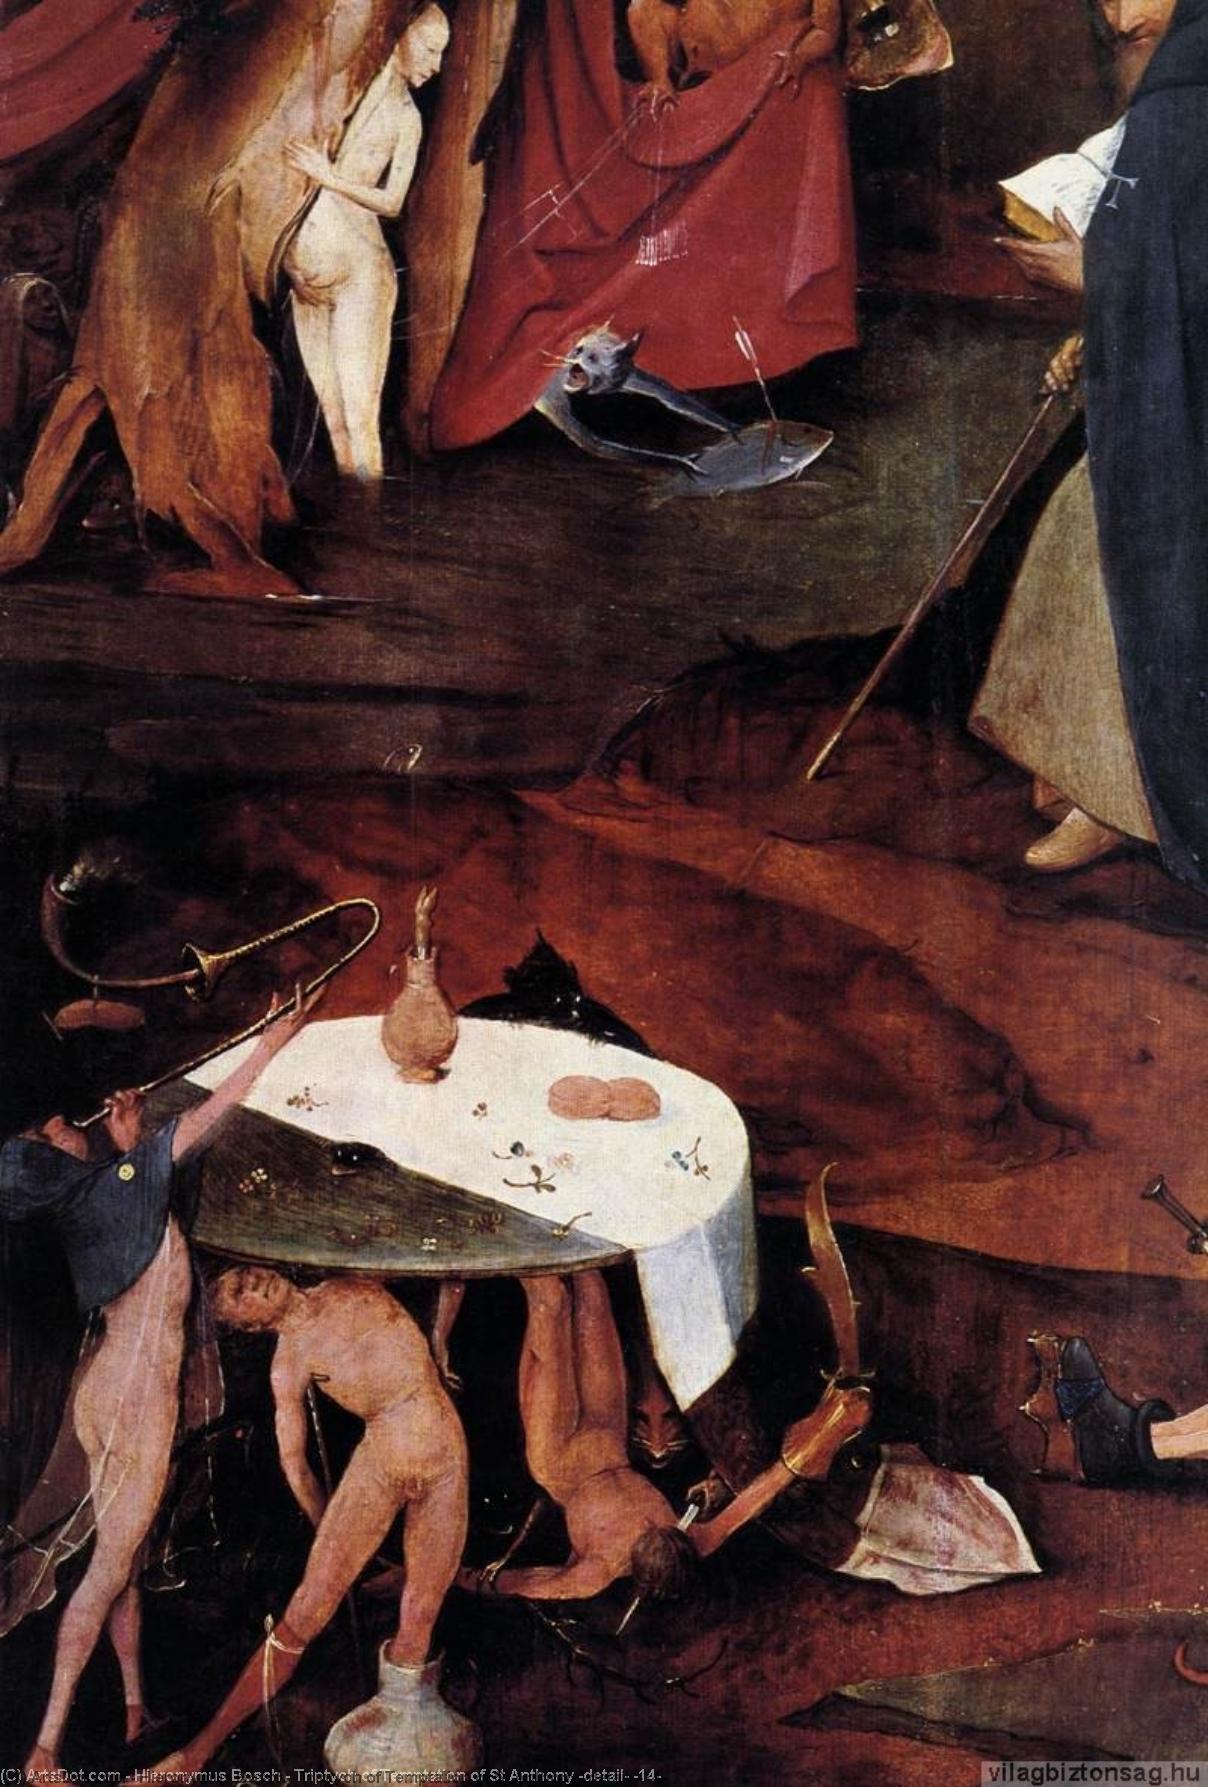 Buy Museum Art Reproductions Triptych of Temptation of St Anthony (detail) (14), 1505 by Hieronymus Bosch (1450-1516, Netherlands) | ArtsDot.com